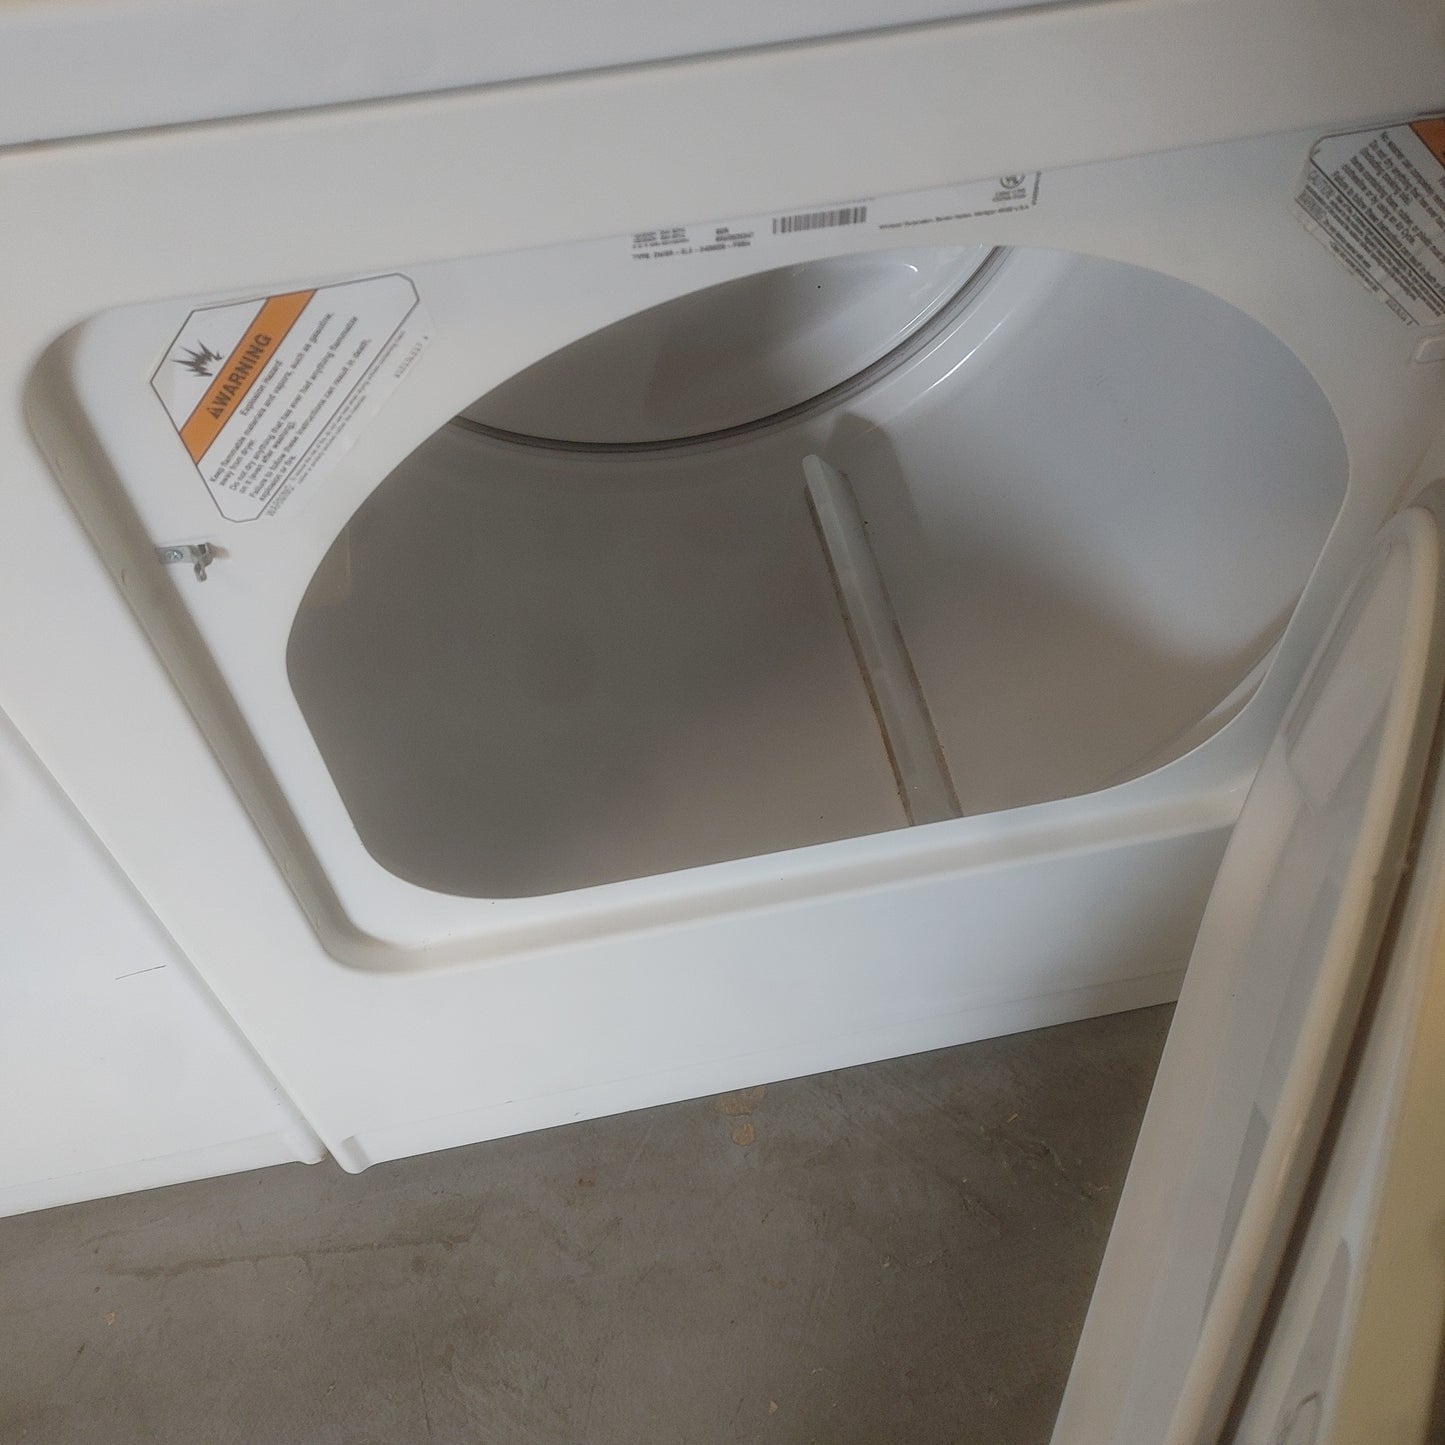 Used Maytag 3.8 cubic foot top load washer with 6.5 cubic foot electric dryer set. Dependable care models